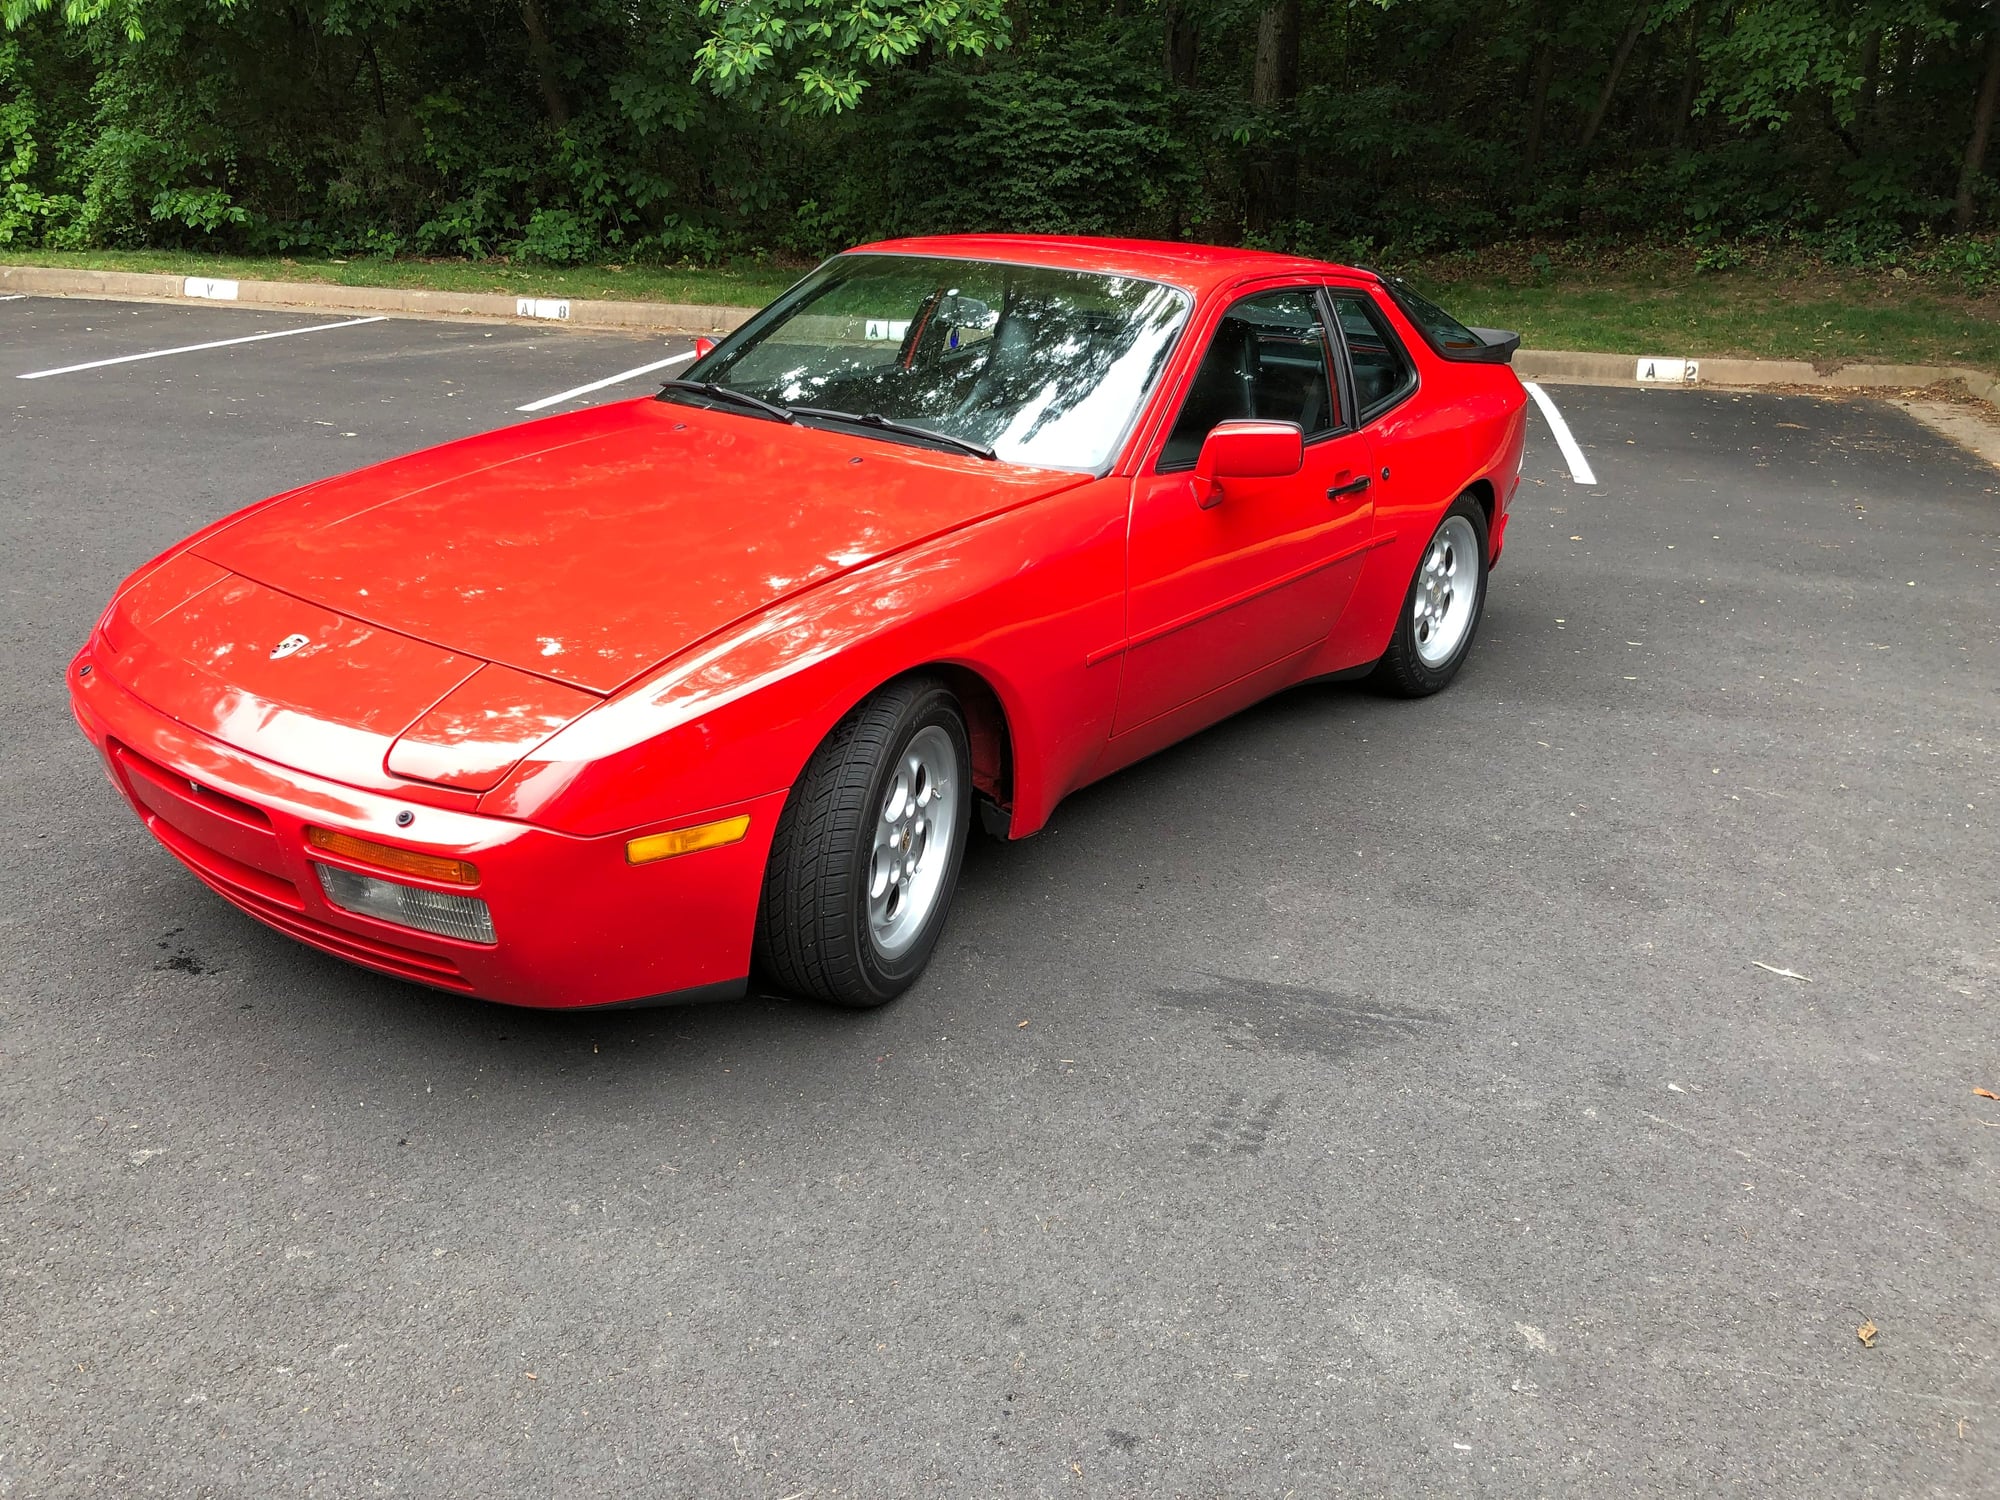 1986 Porsche 944 - upgraded 1986 Porsche 944 Turbo - Used - VIN WP0AA0951GN151572 - 86,000 Miles - 4 cyl - 2WD - Manual - Coupe - Red - Reston, VA 20194, United States